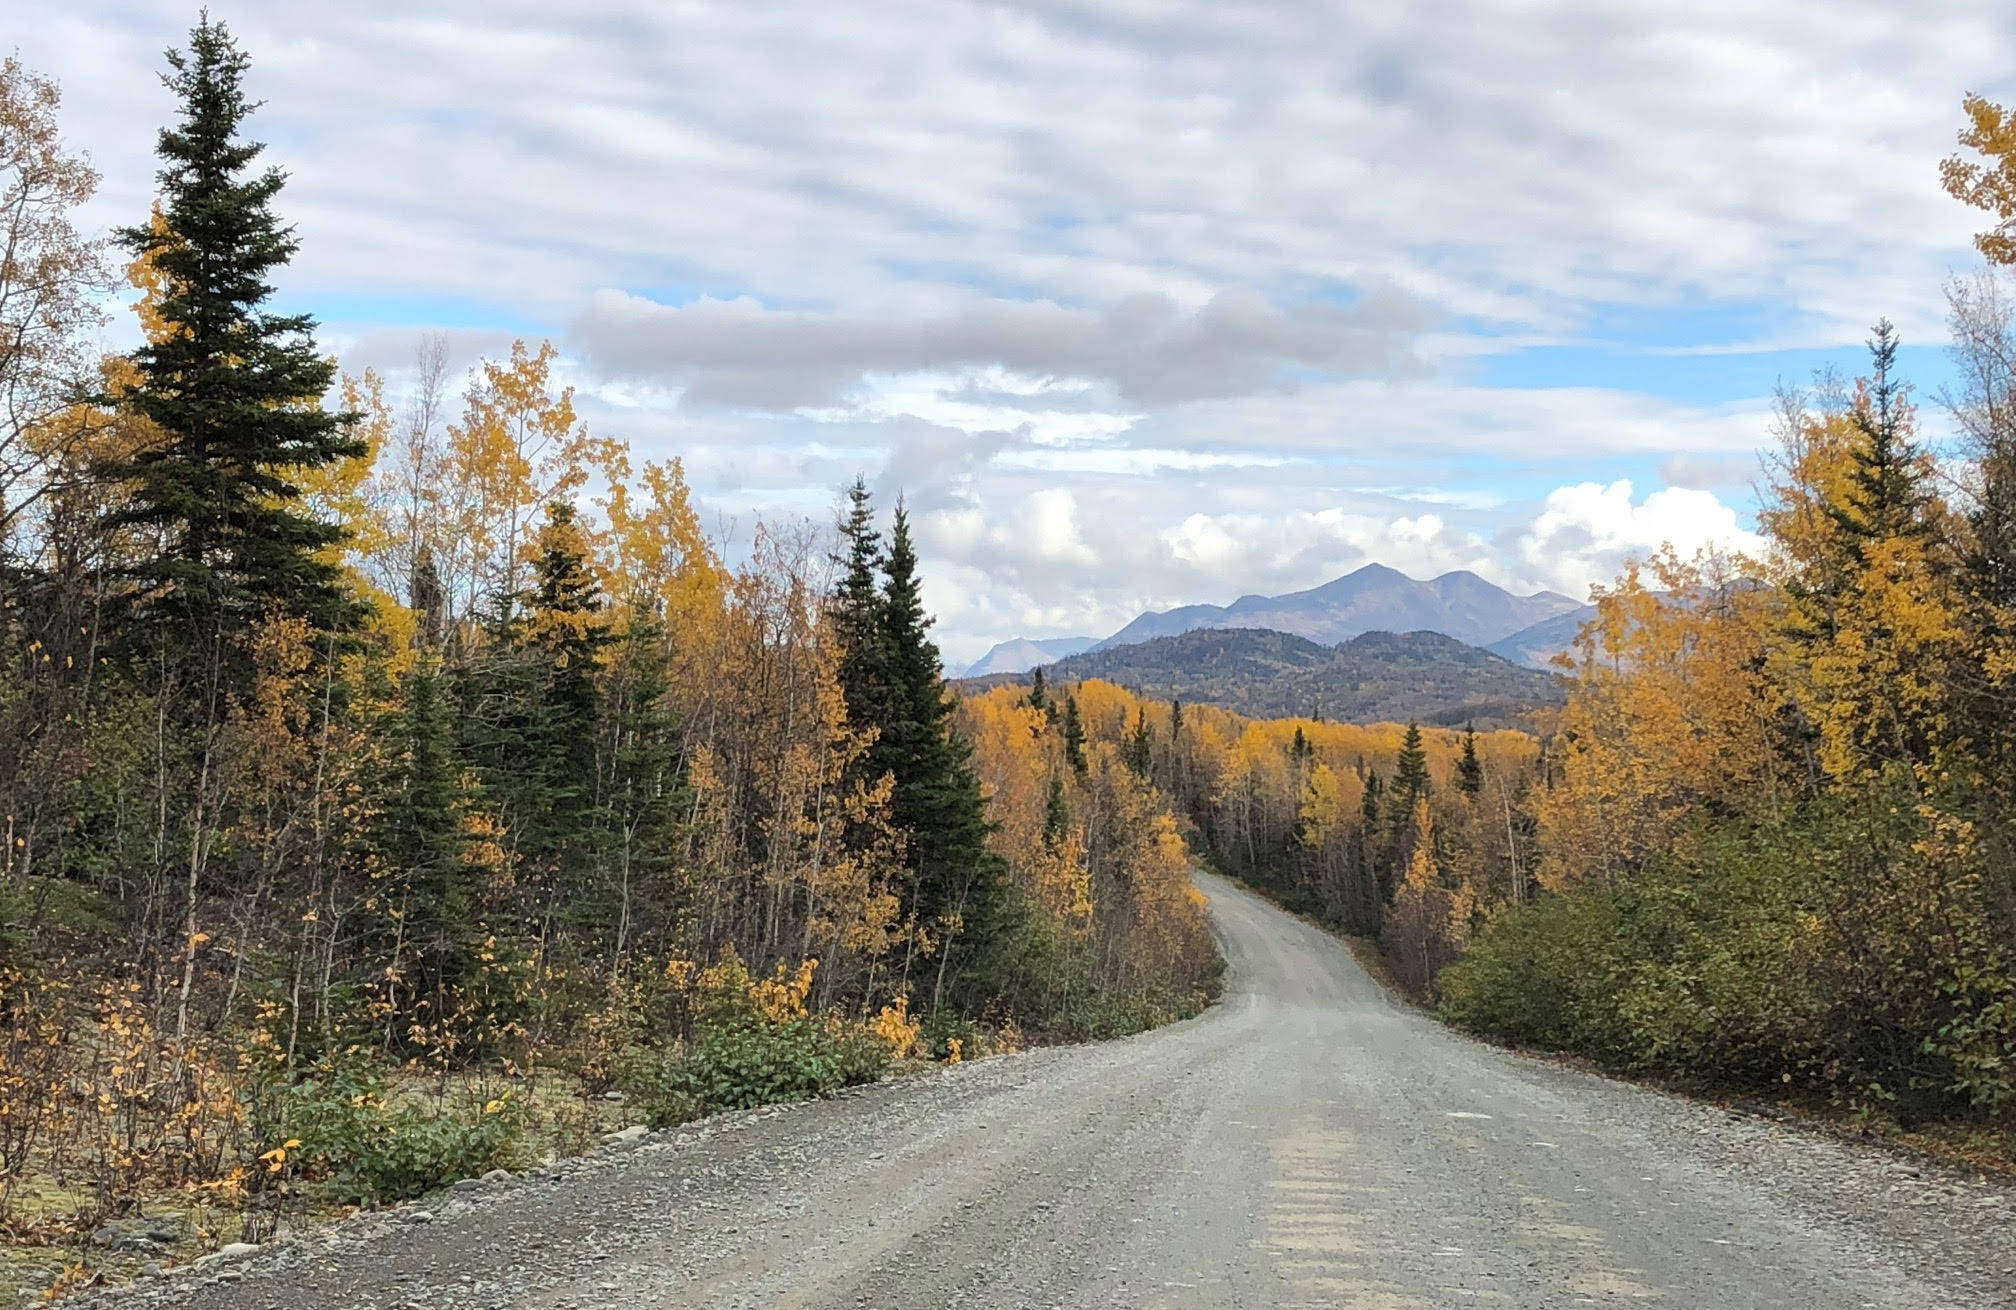 Autumn arrives on Skilak Lake Road in October 2018. (Photo by Leah Eskelin/USFWS)